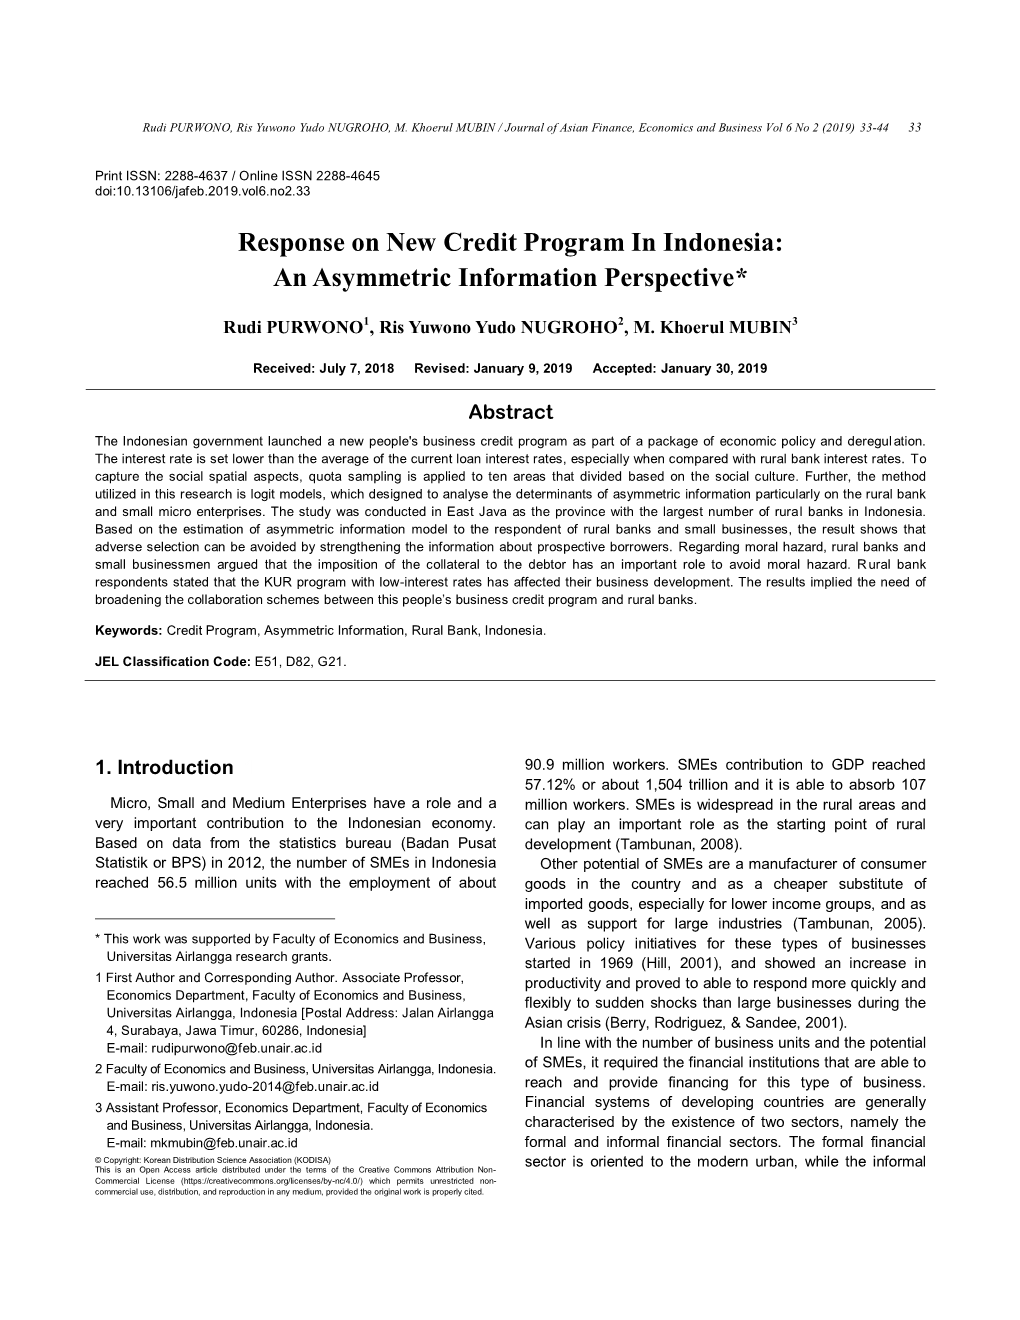 Response on New Credit Program in Indonesia: an Asymmetric Information Perspective*